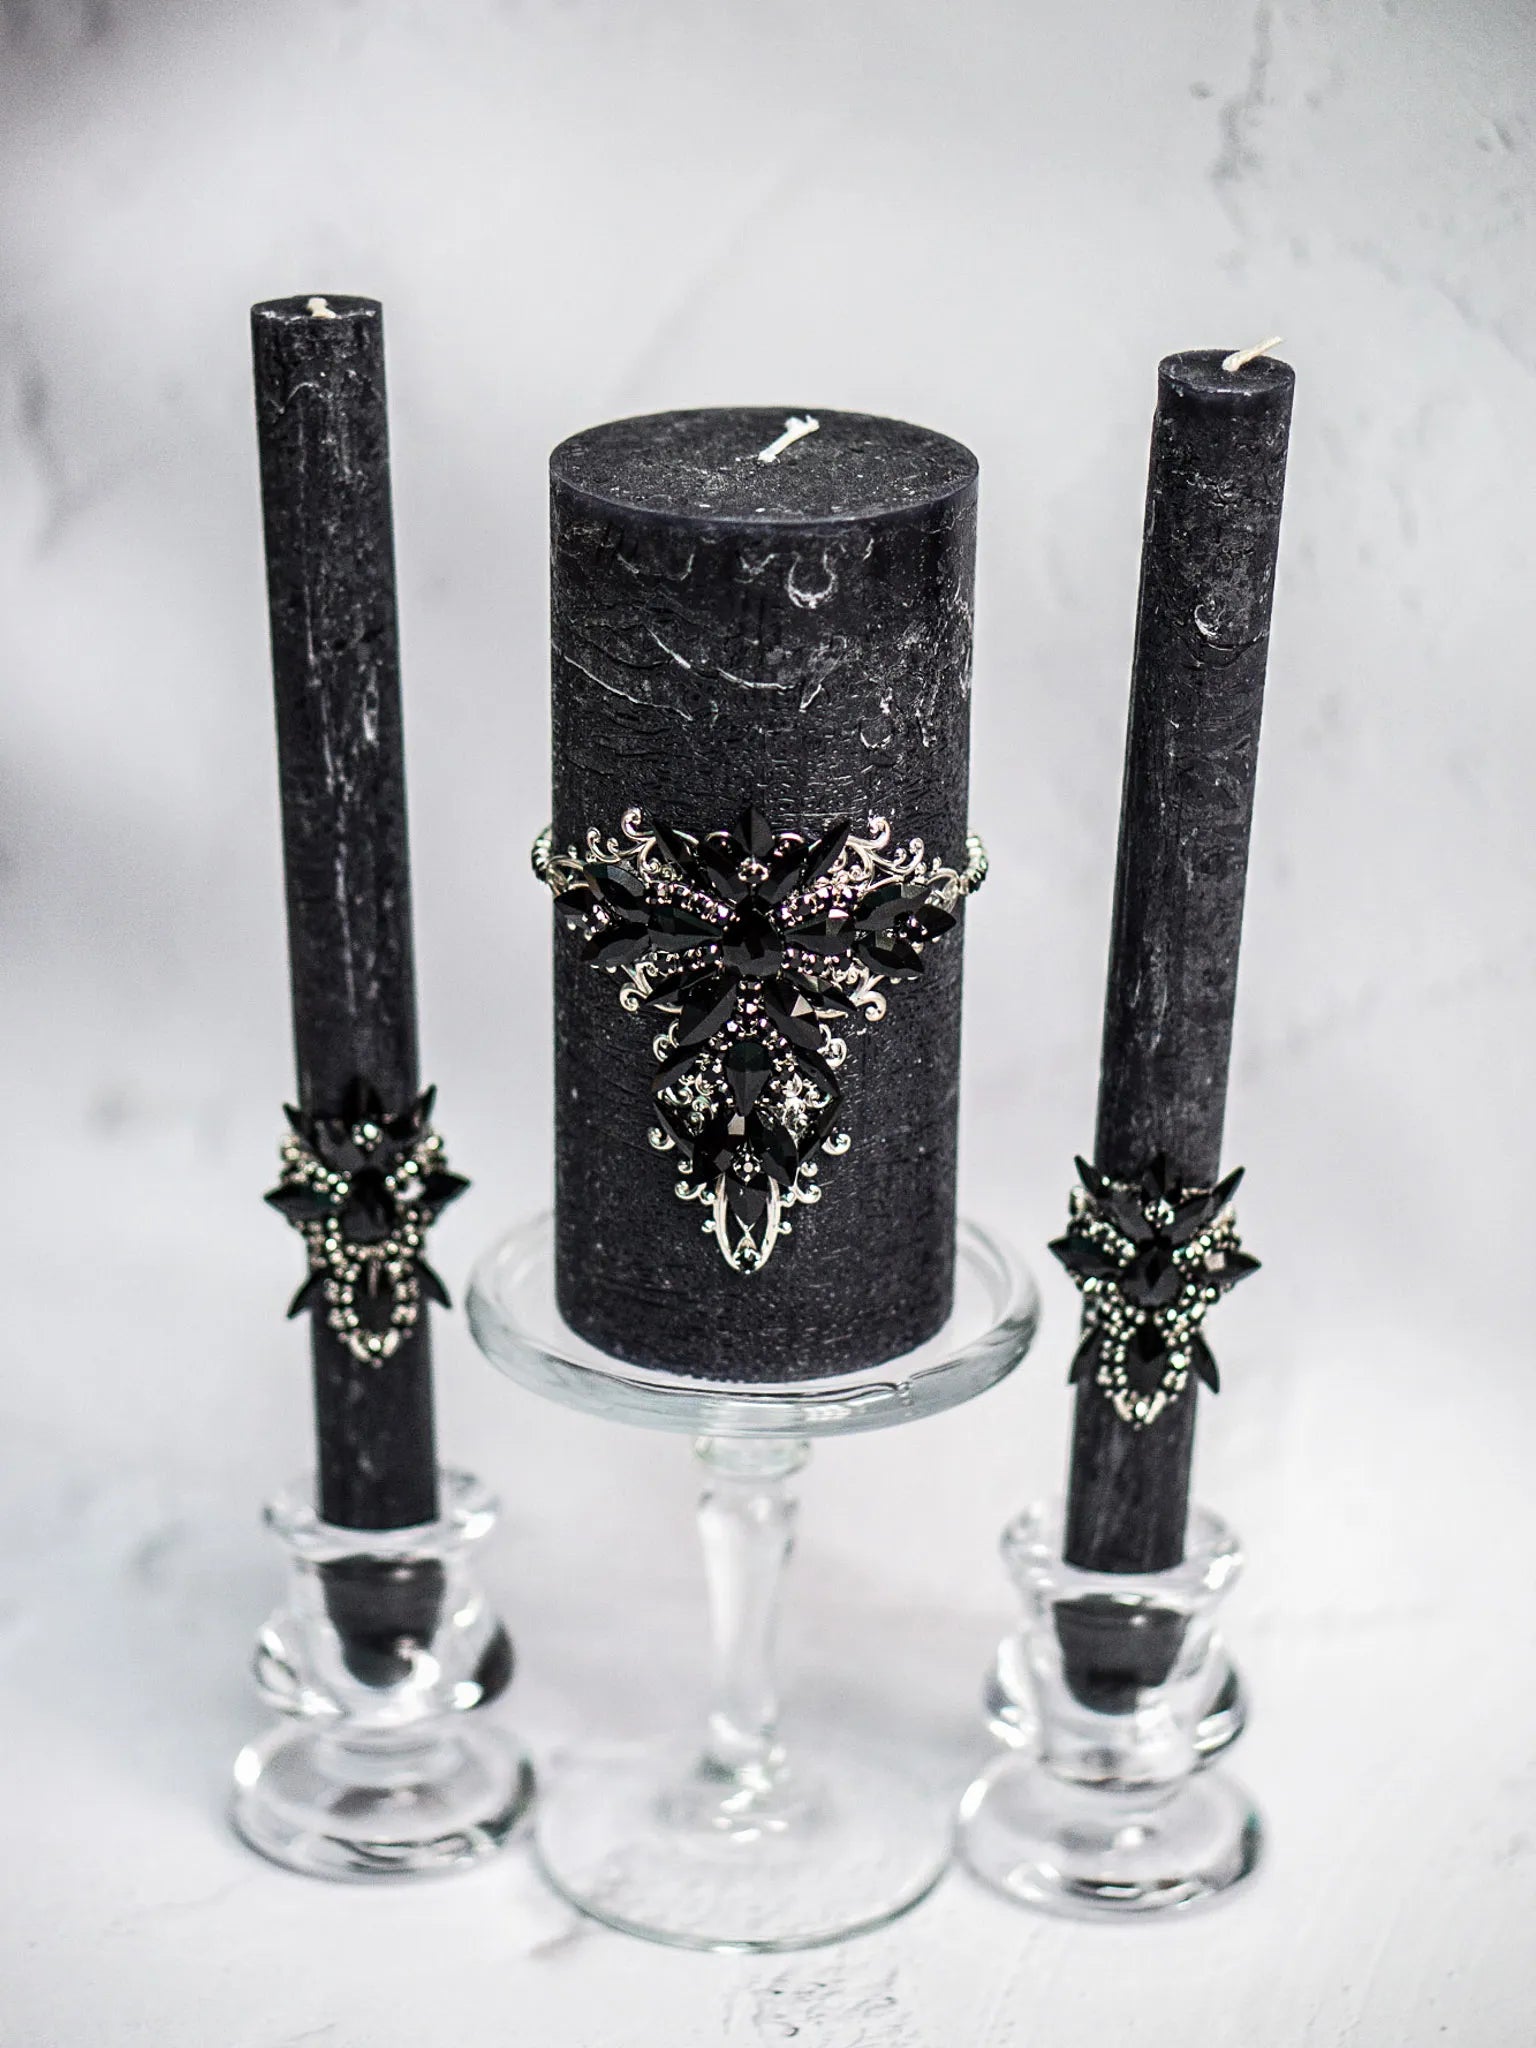 Personalized Gothic unity candles with silver accents